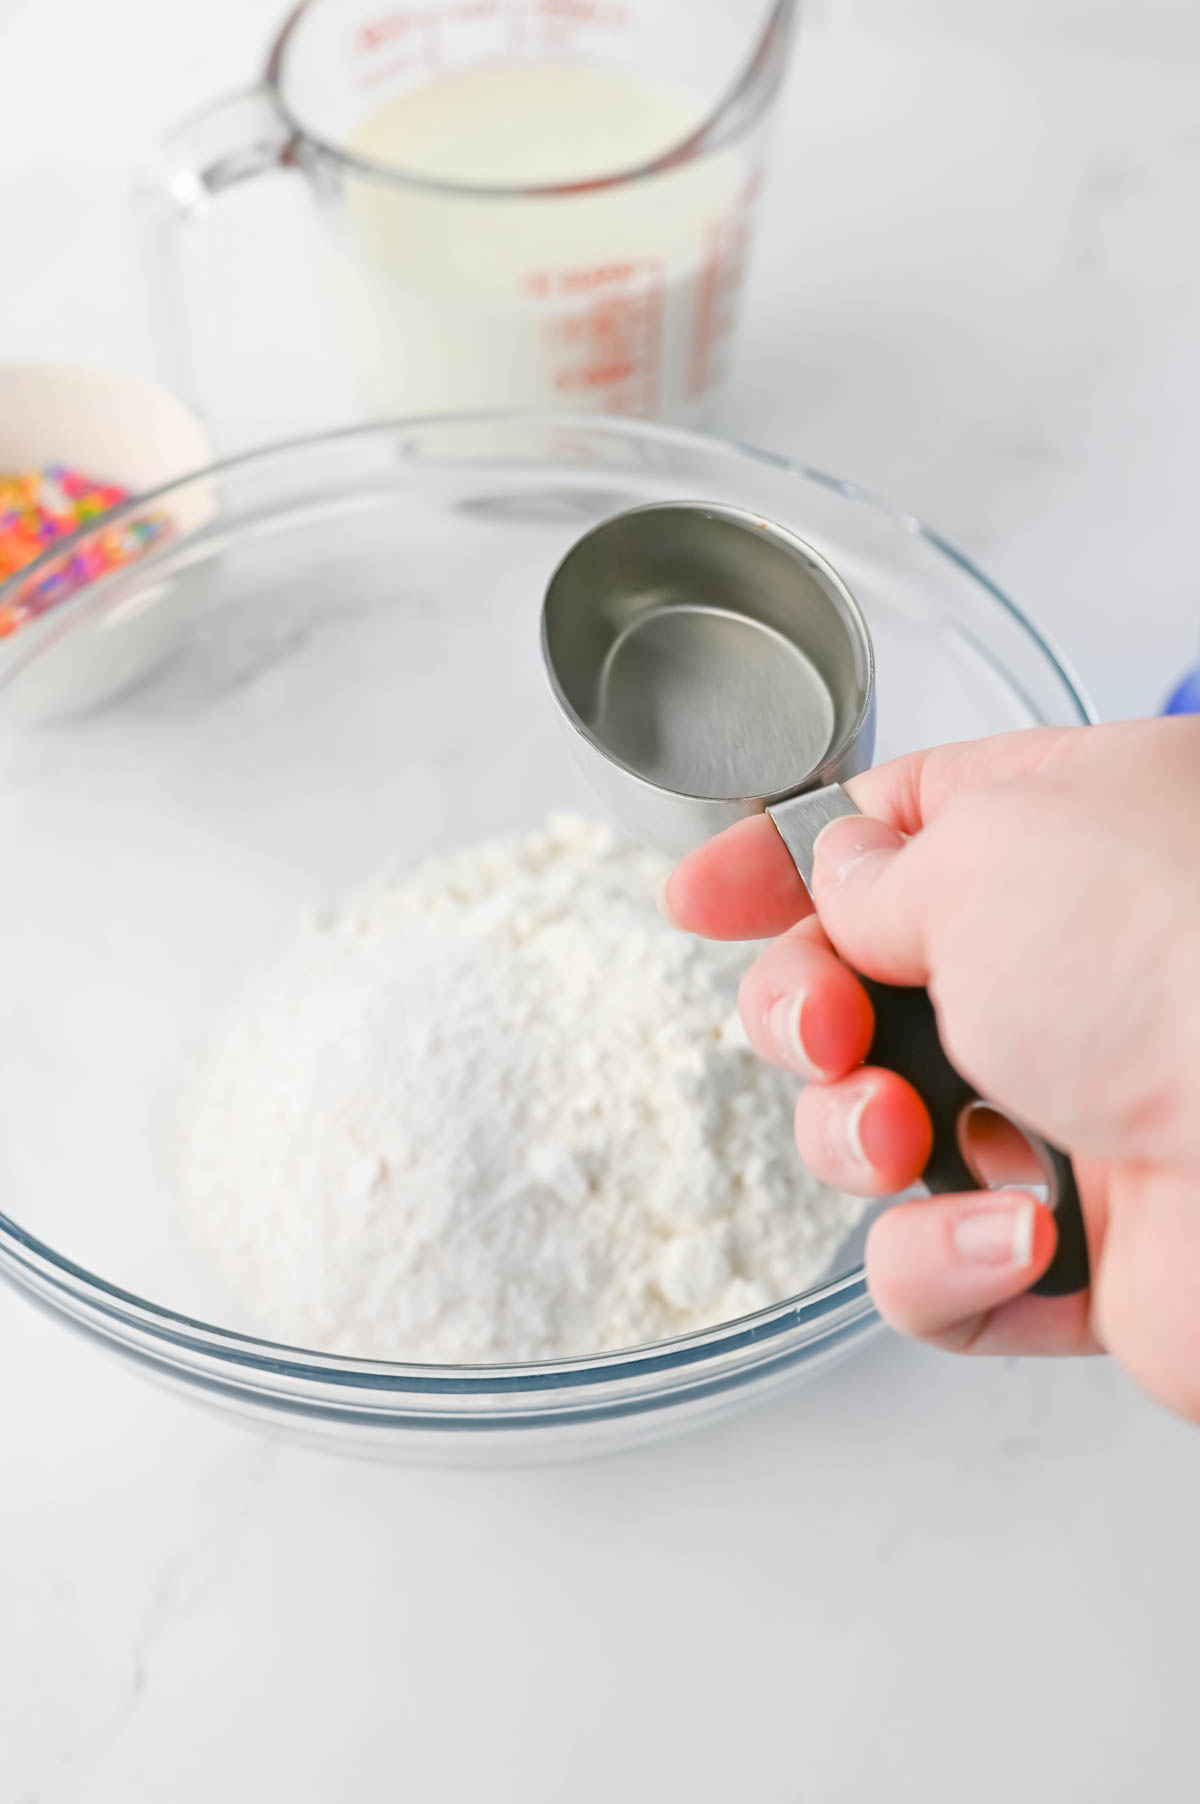 A person is using a measuring spoon to add ingredients in a bowl.